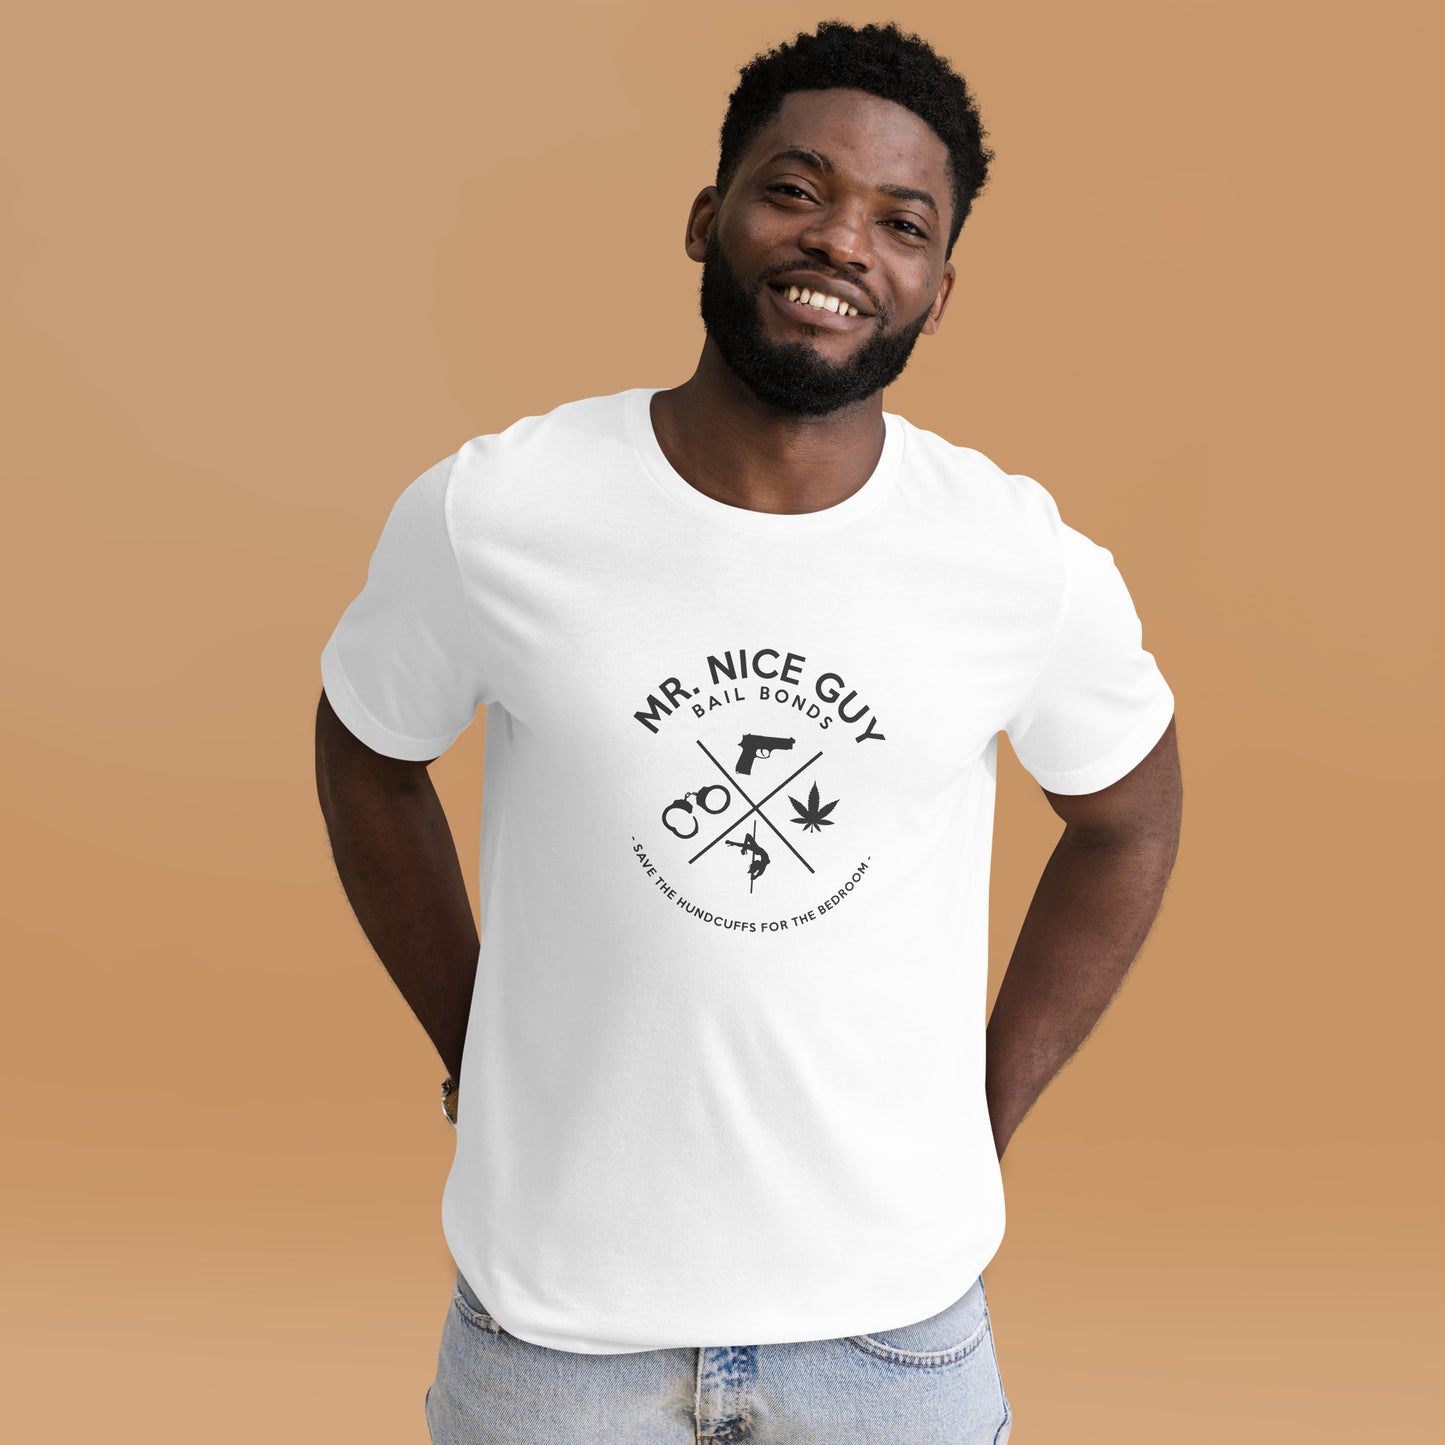 Camp Style save the handcuffs Unisex t-shirt